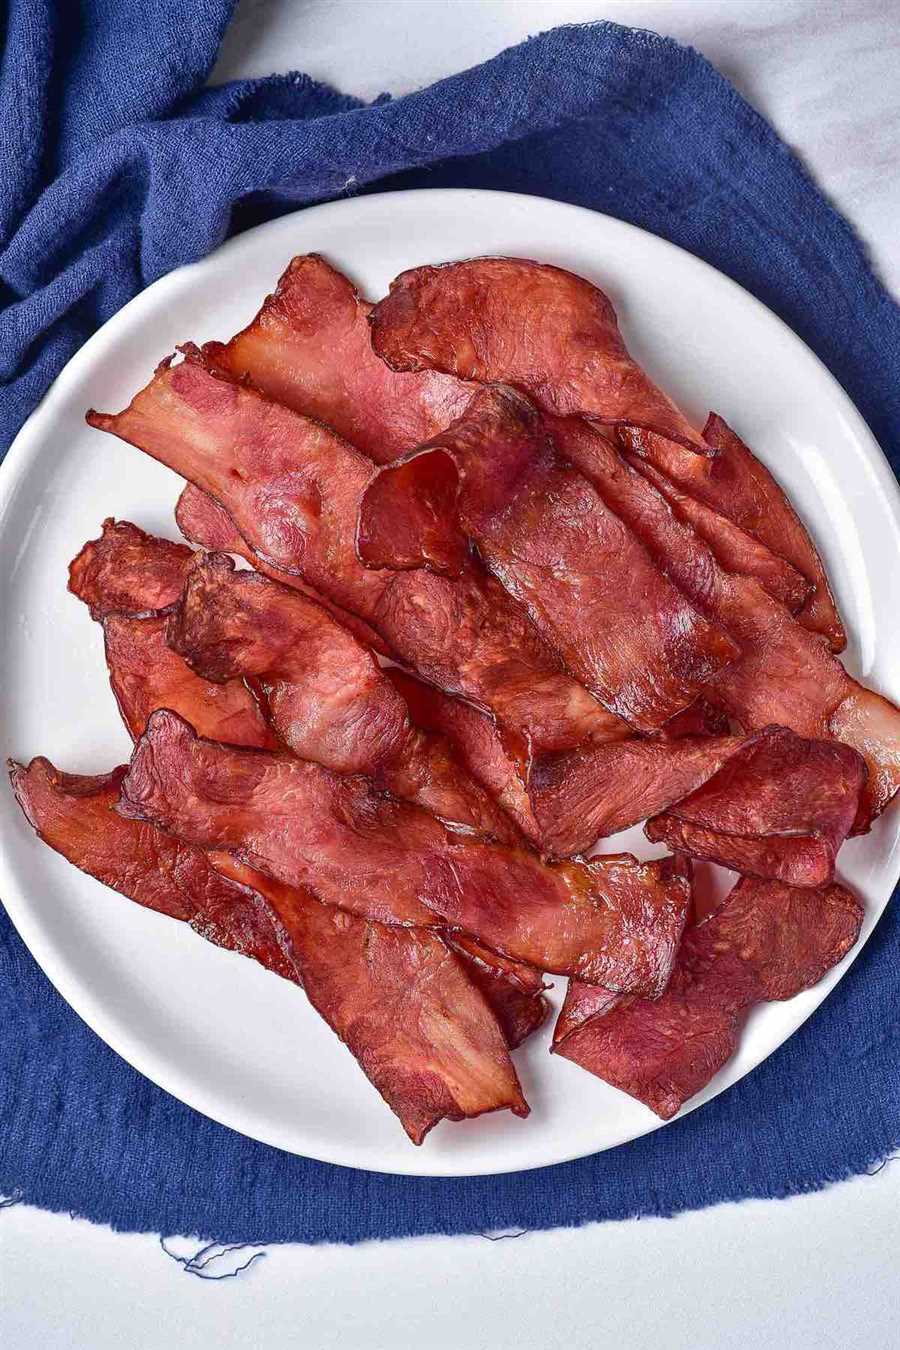 How to Cook Turkey Bacon